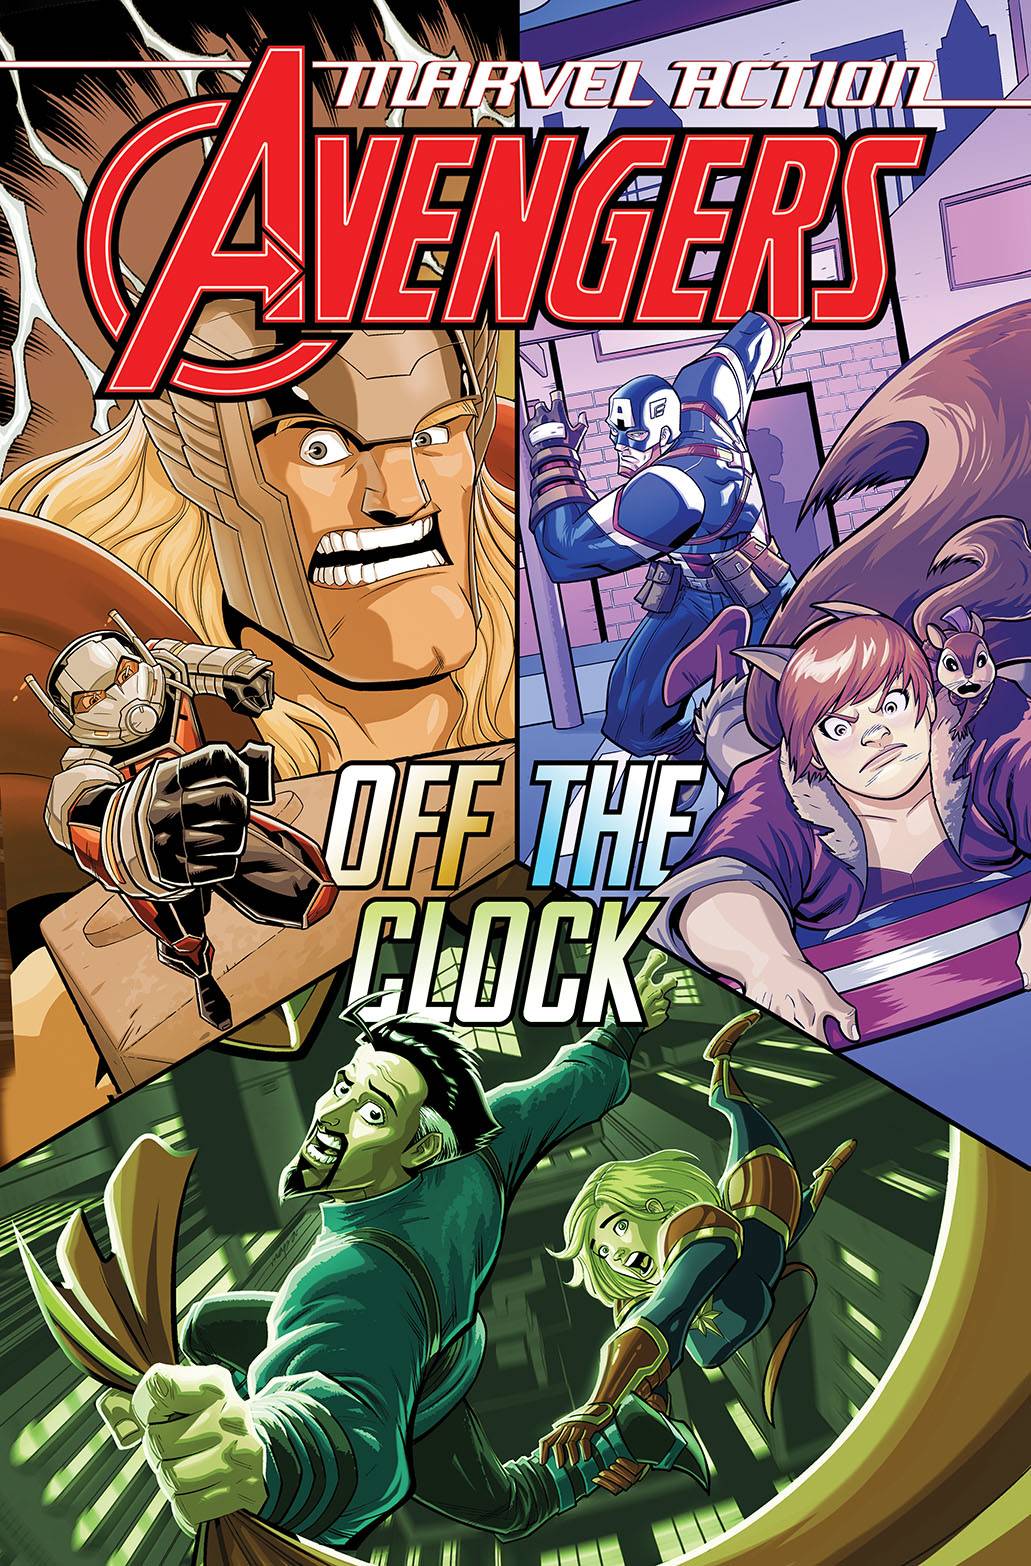 MARVEL ACTION AVENGERS TP BOOK 05 OFF THE CLOCK